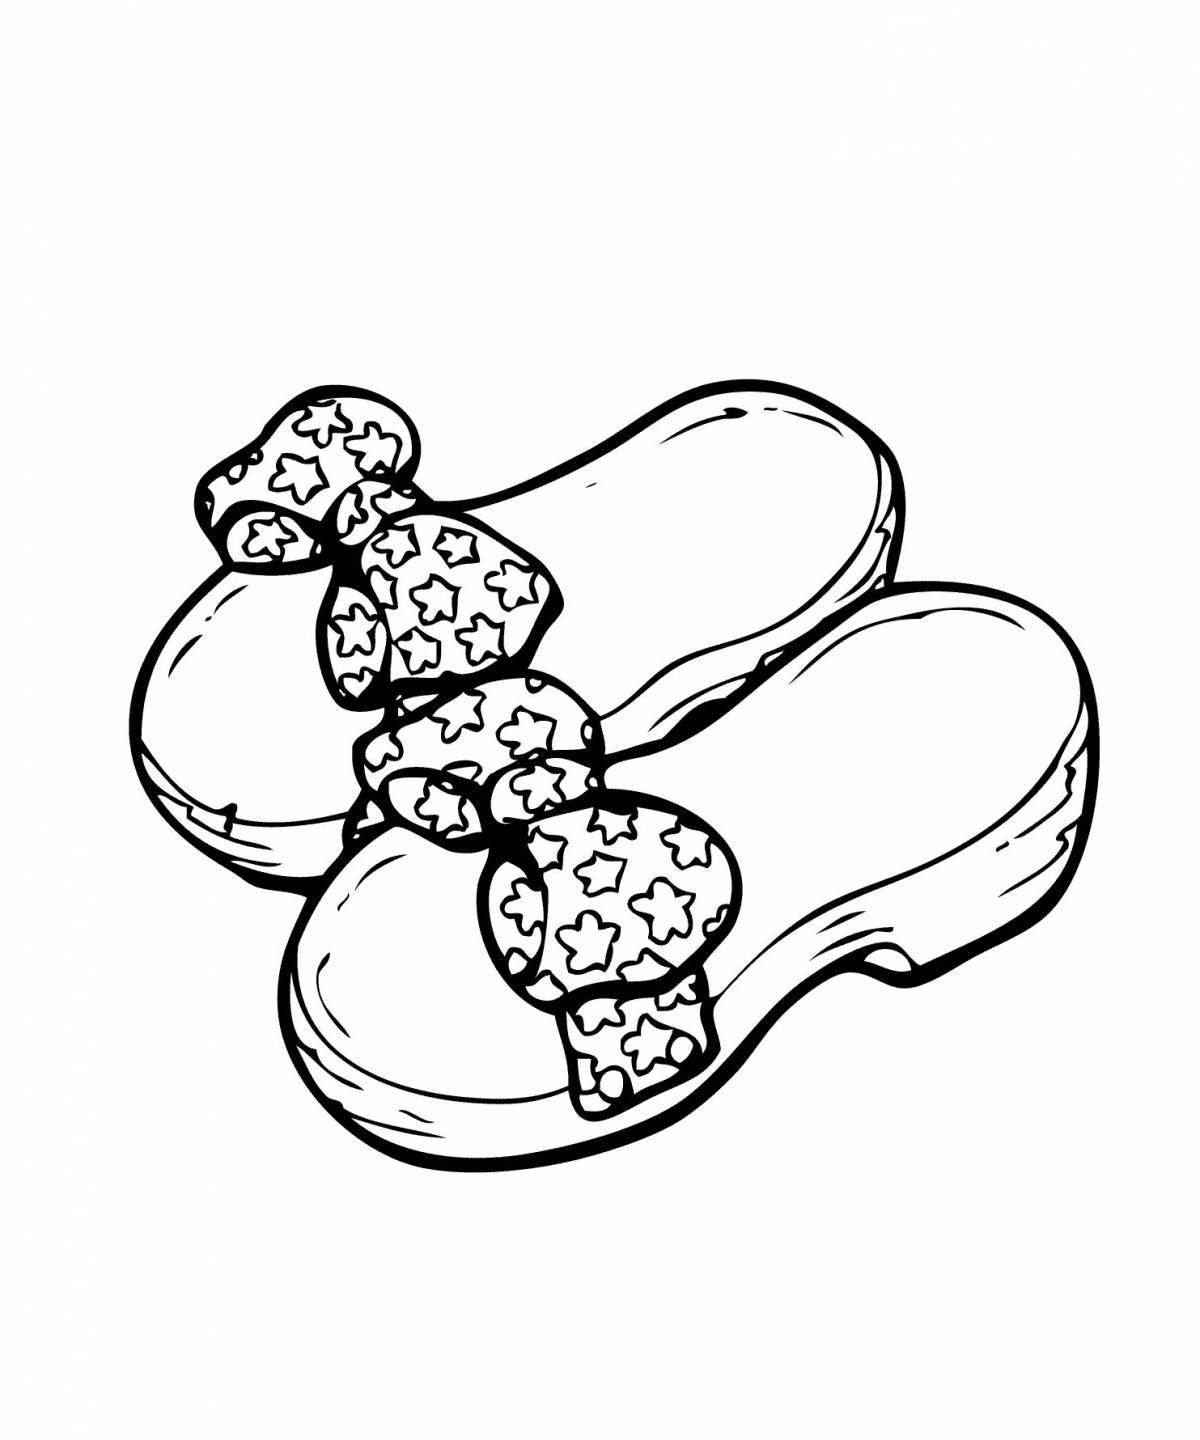 Coloring page playful shoes for girls